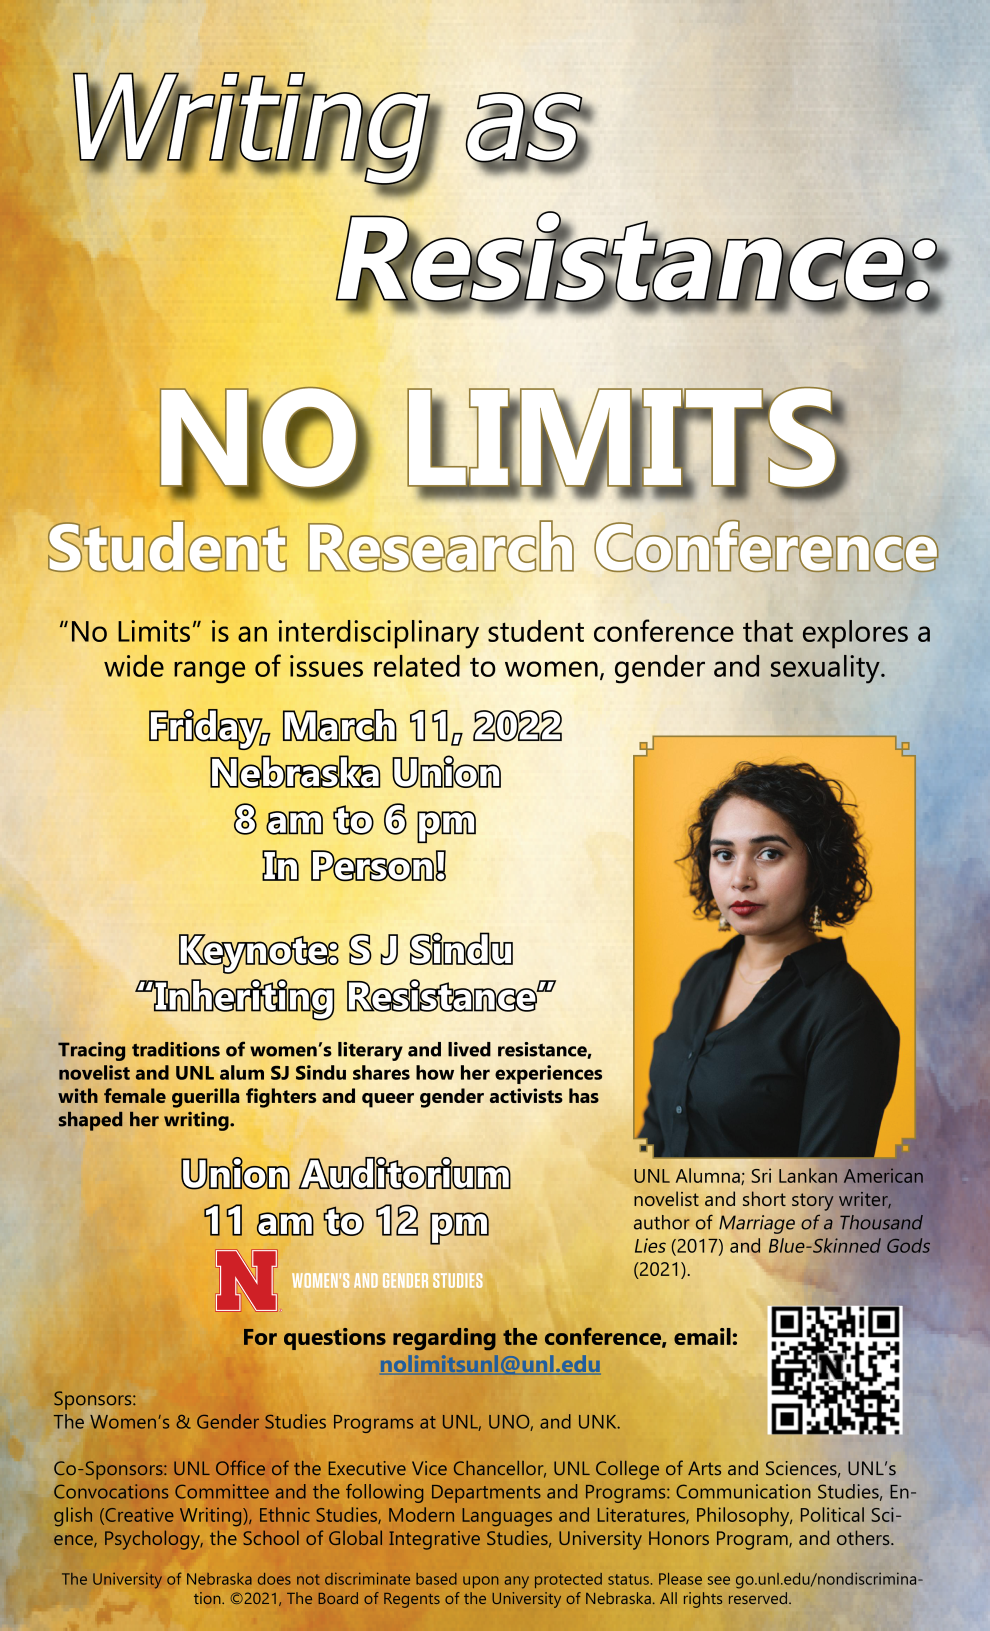 "Writing as Resistance" - No Limits 2022 Student Research Conference is this Friday, March 11th!